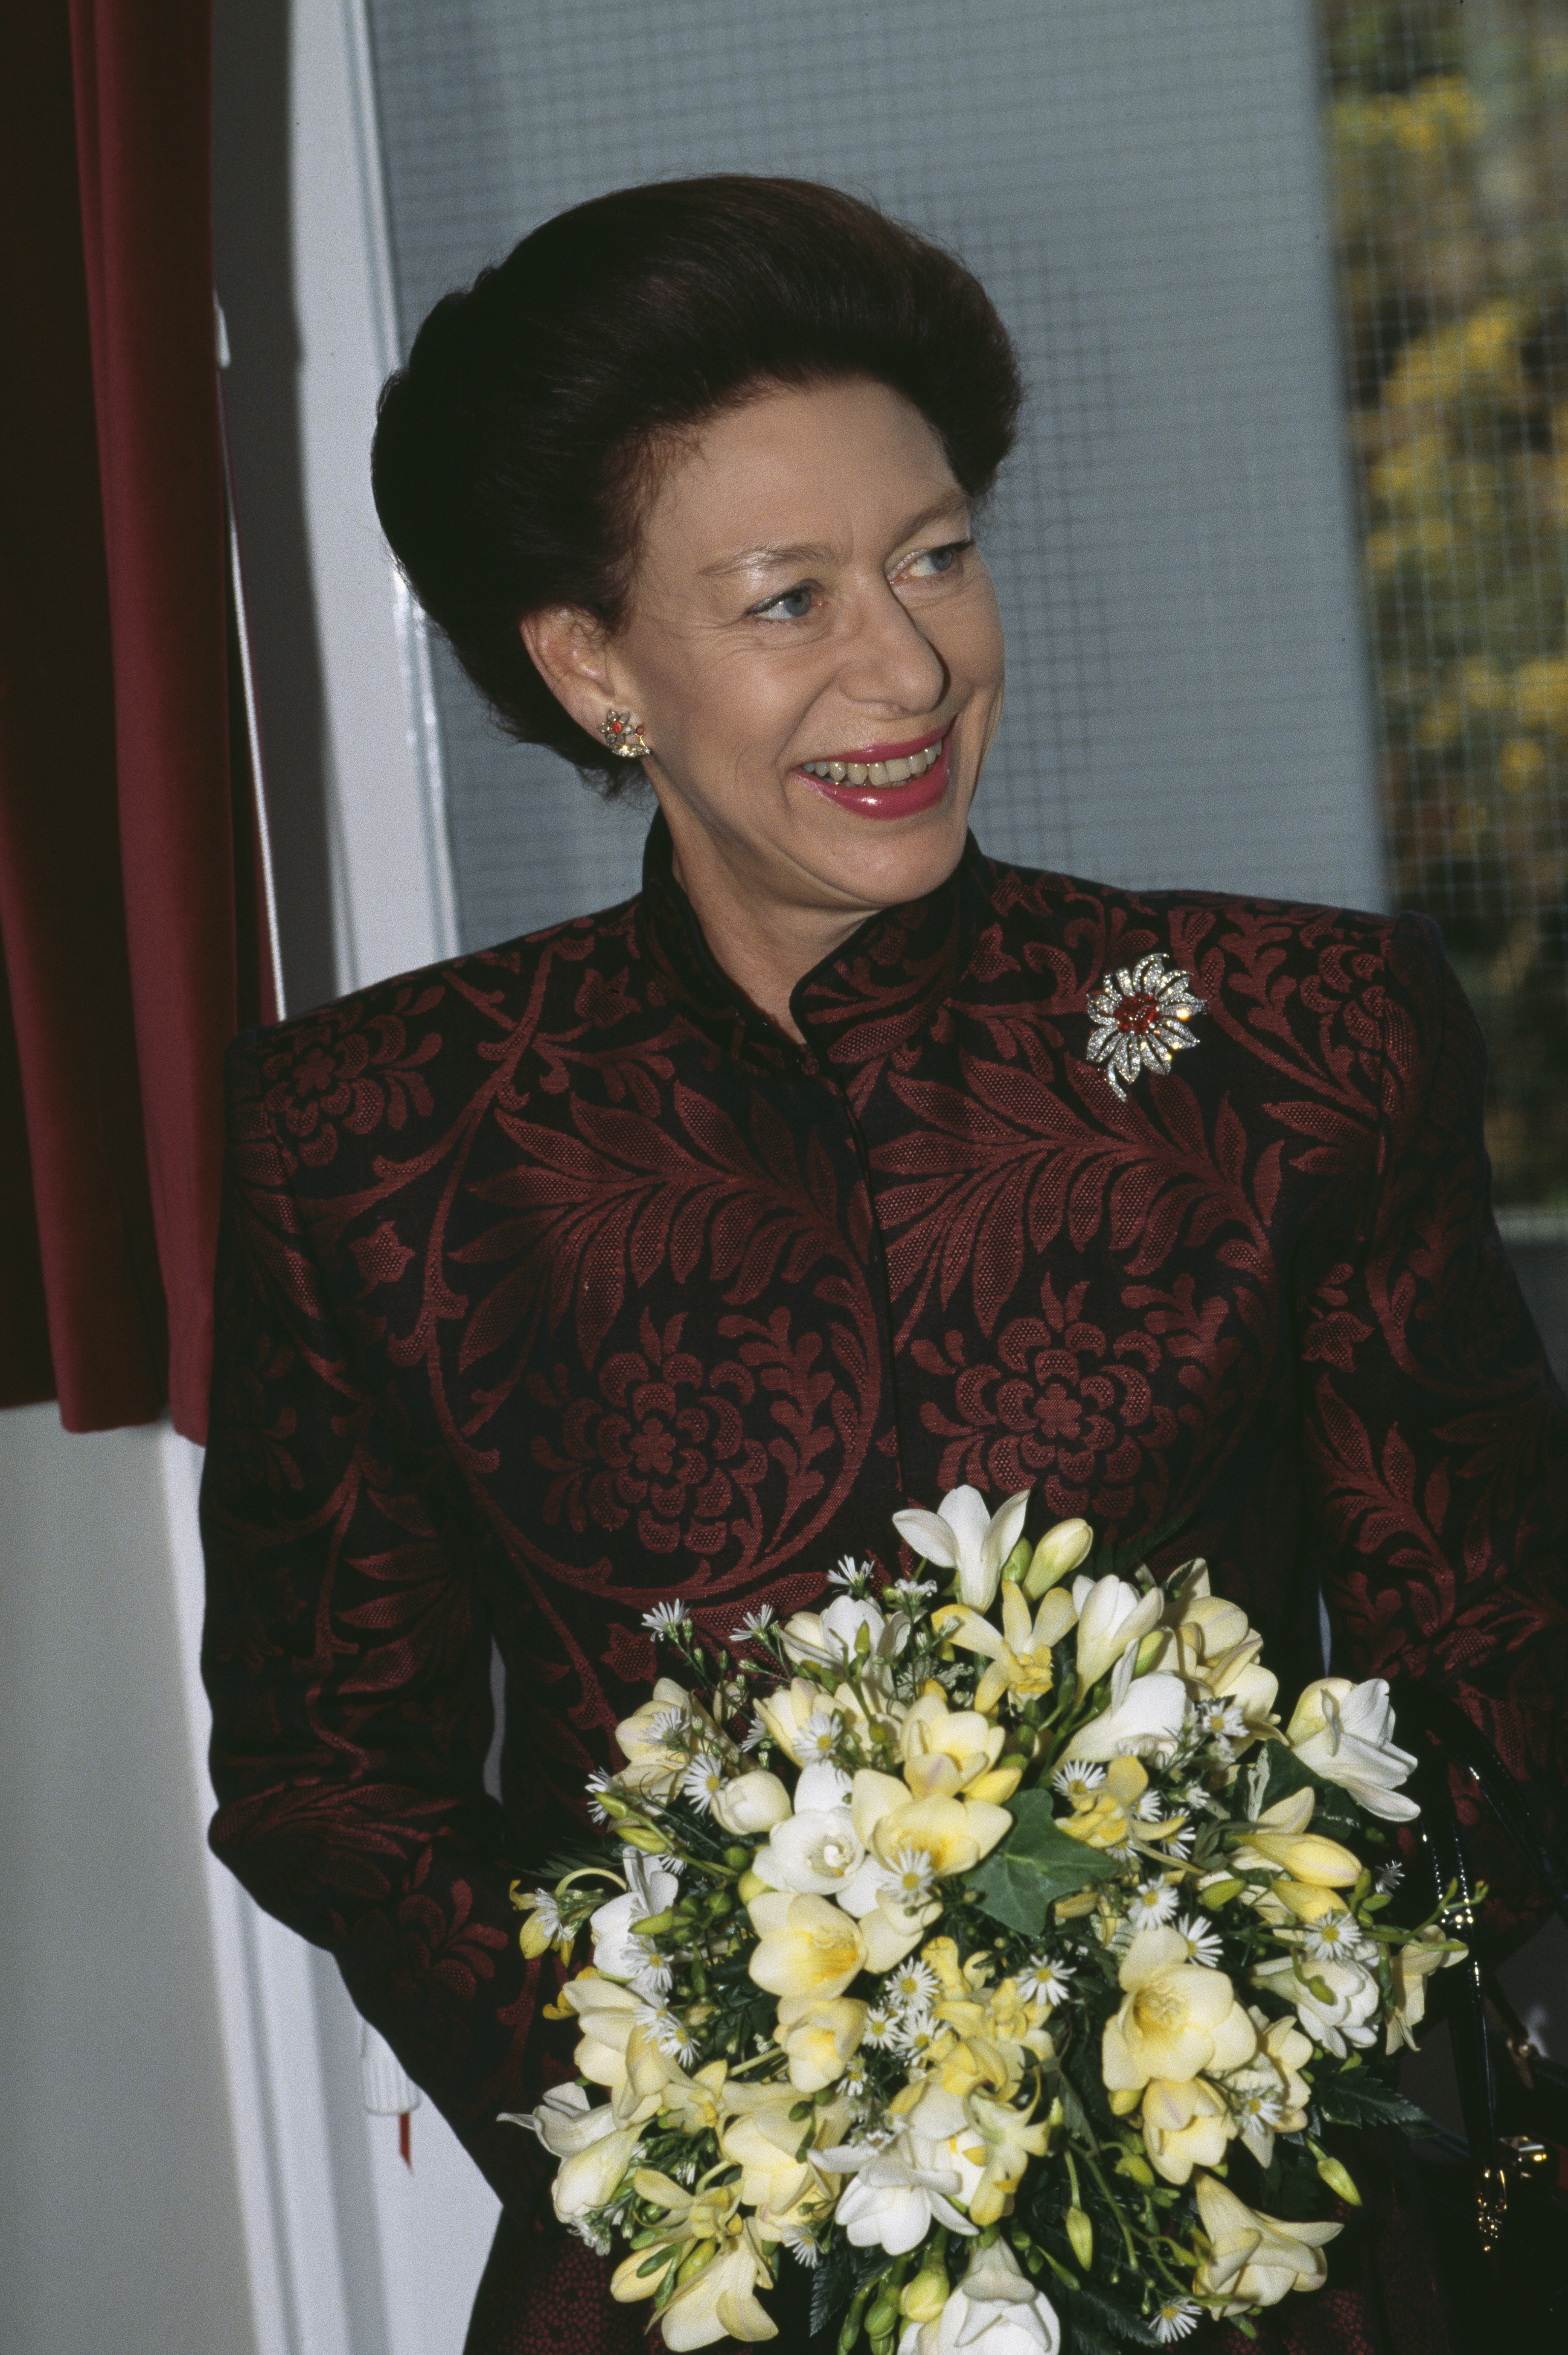 Close-up of Margaret holding flowers and smiling